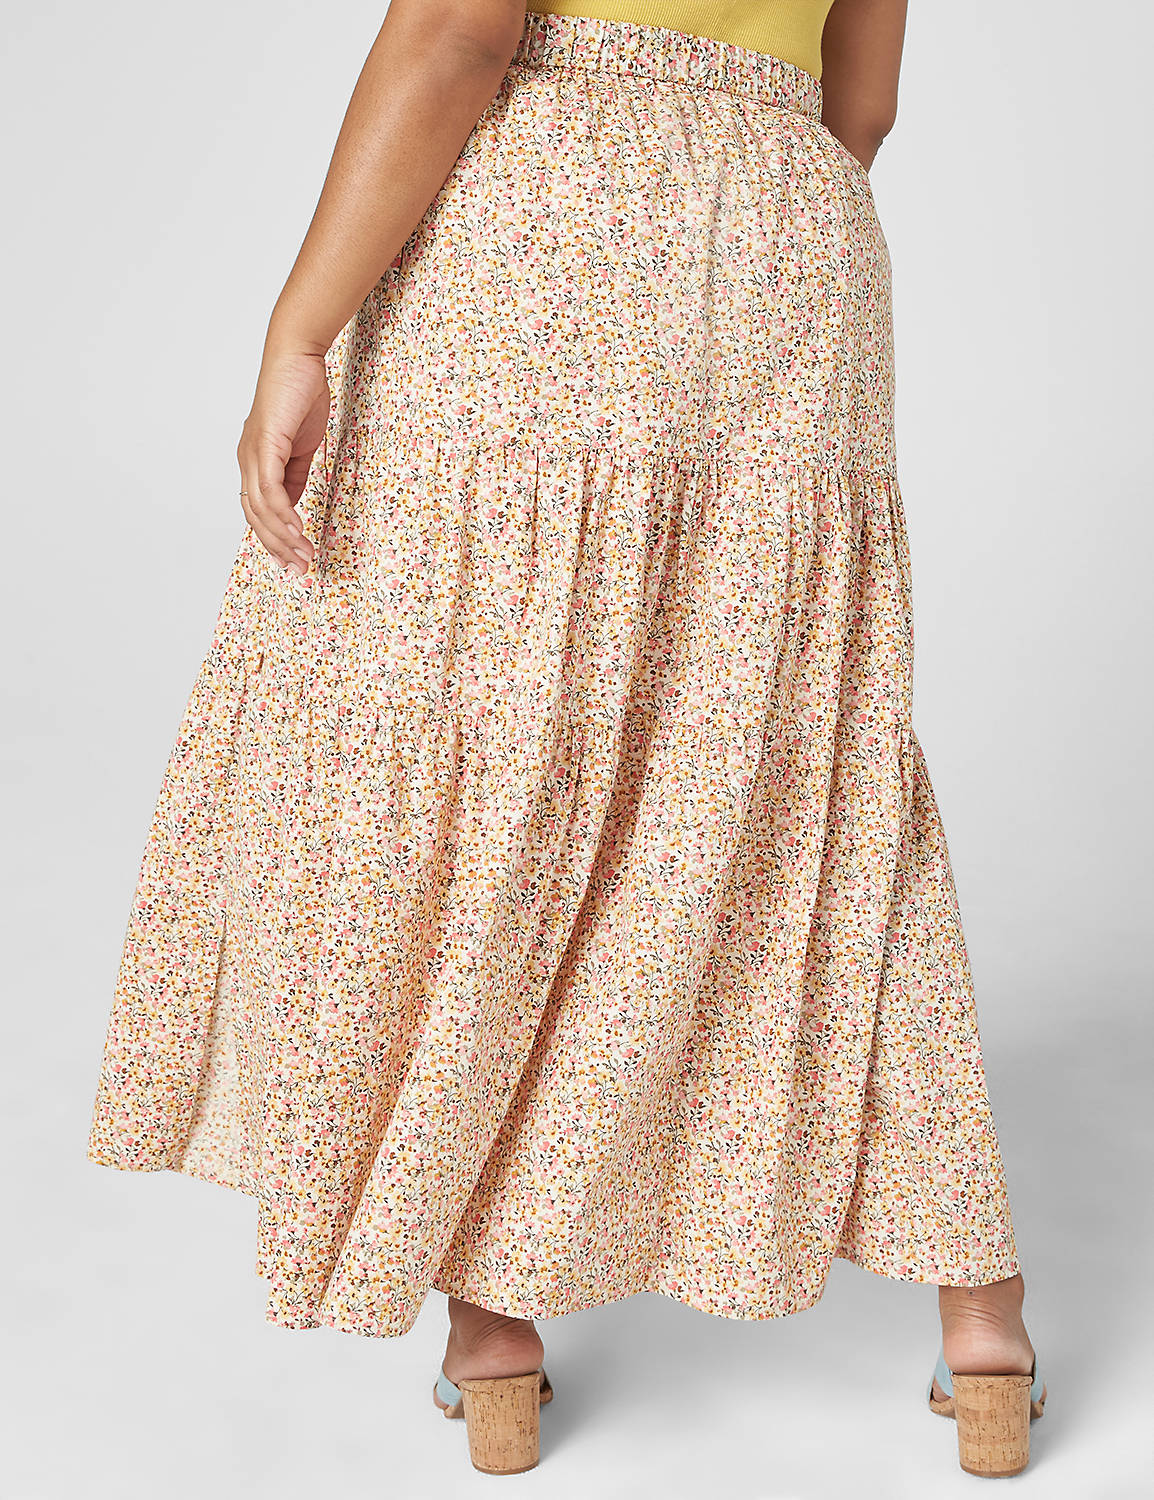 Floral Prints Tiered Maxi Skirt 113 Product Image 2